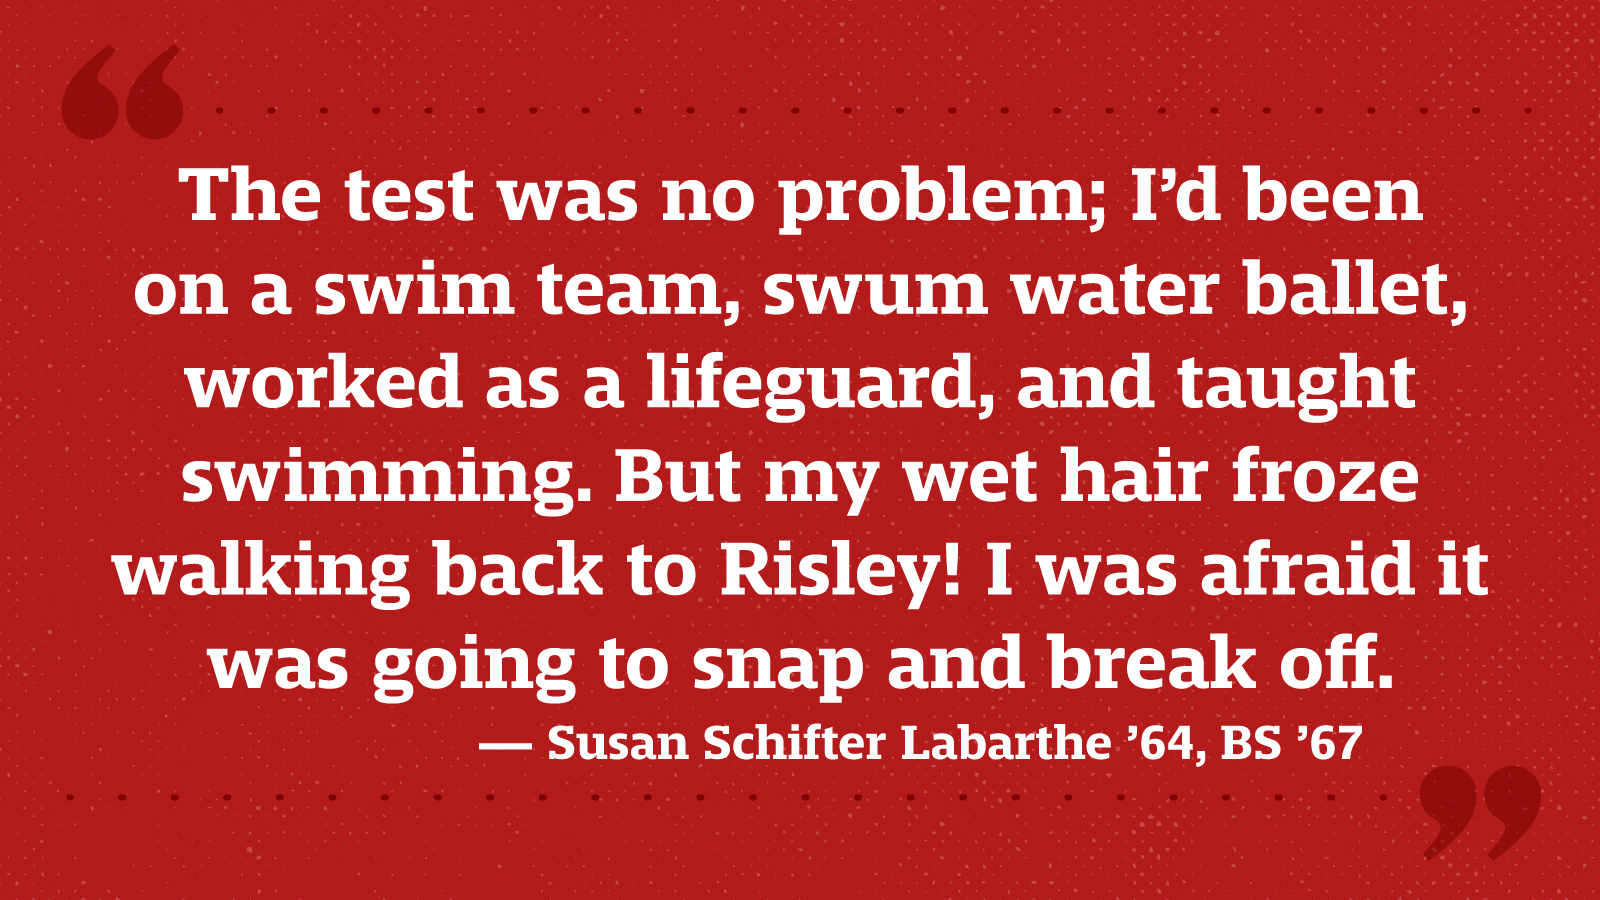 The test was no problem; I’d been on a swim team, swum water ballet, worked as a lifeguard, and taught swimming. But my wet hair froze walking back to Risley! I was afraid it was going to snap and break off. — Susan Schifter Labarthe ’64, BS ’67